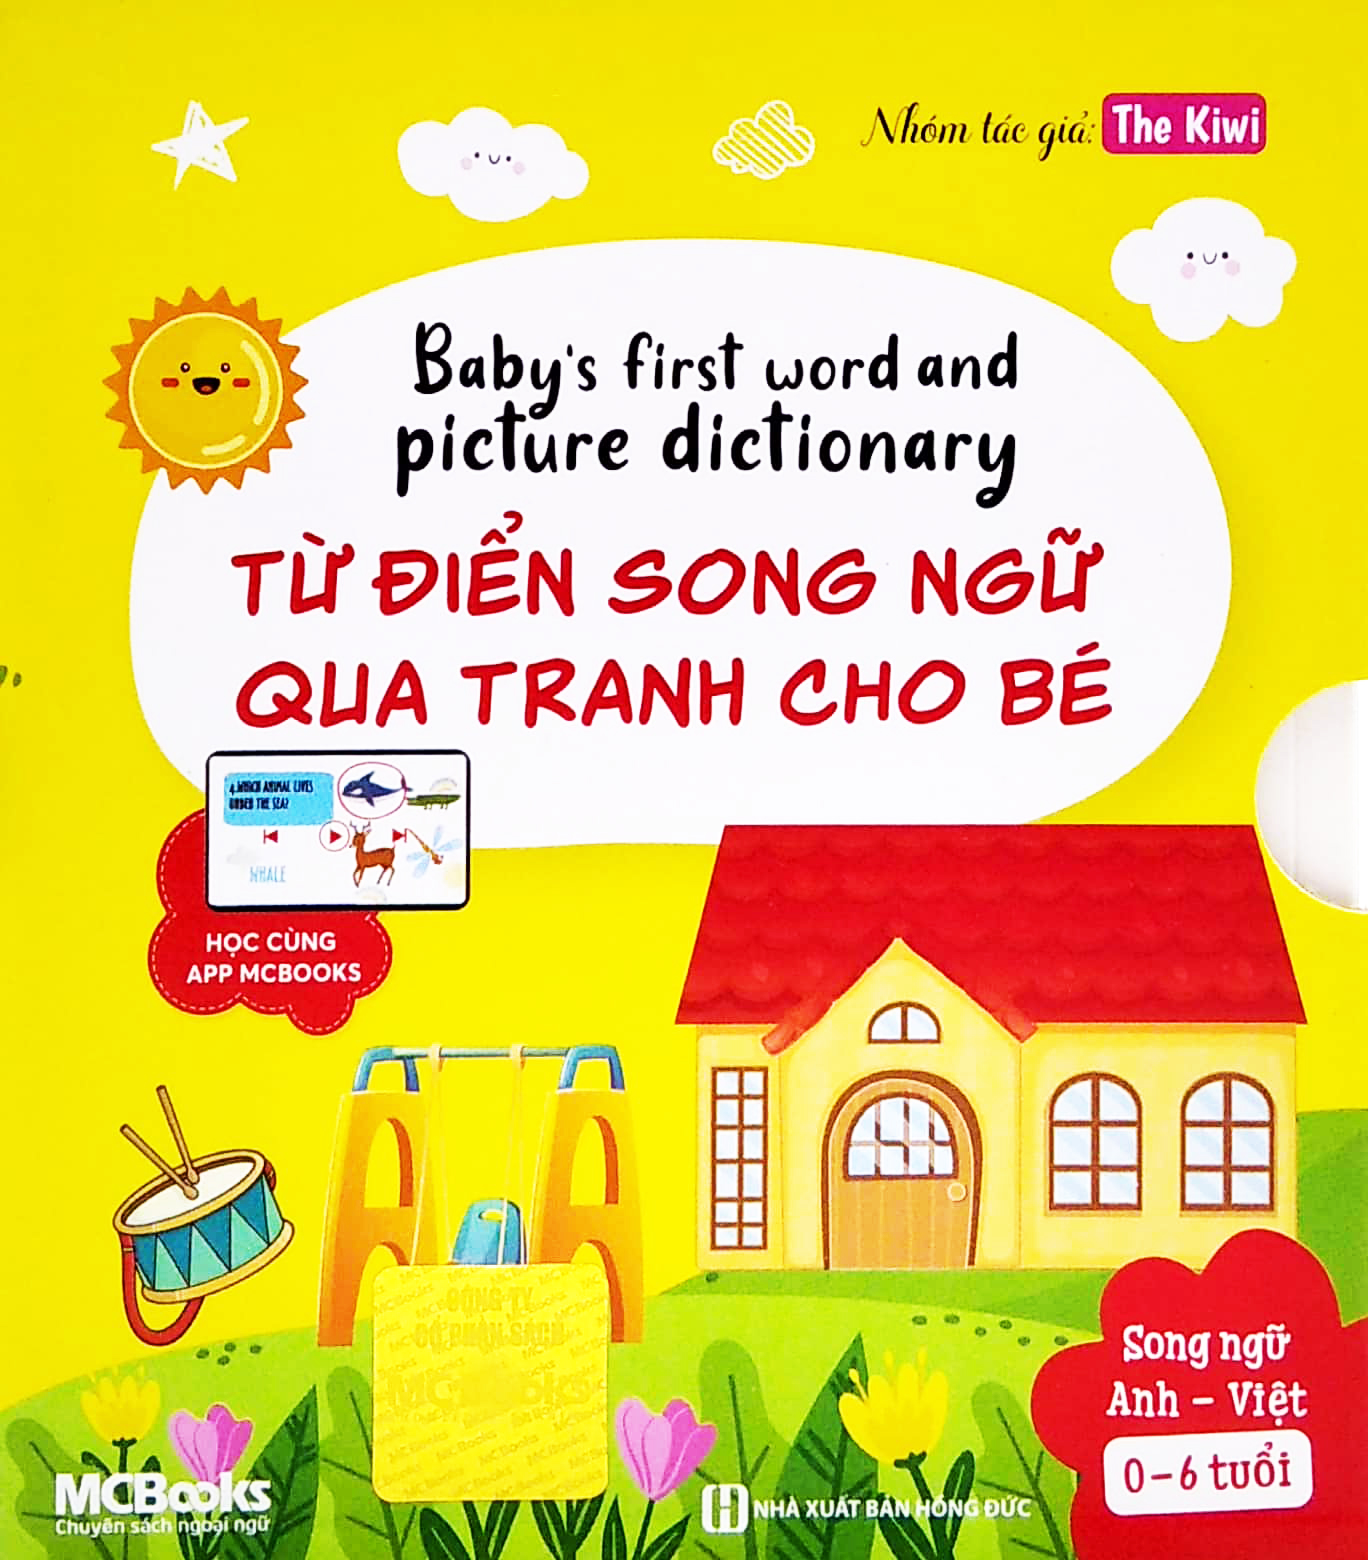 Combo 6 Cuốn Baby’S First Word And Picture Dictionary - Từ Điển Song Ngữ Qua Tranh Cho Bé